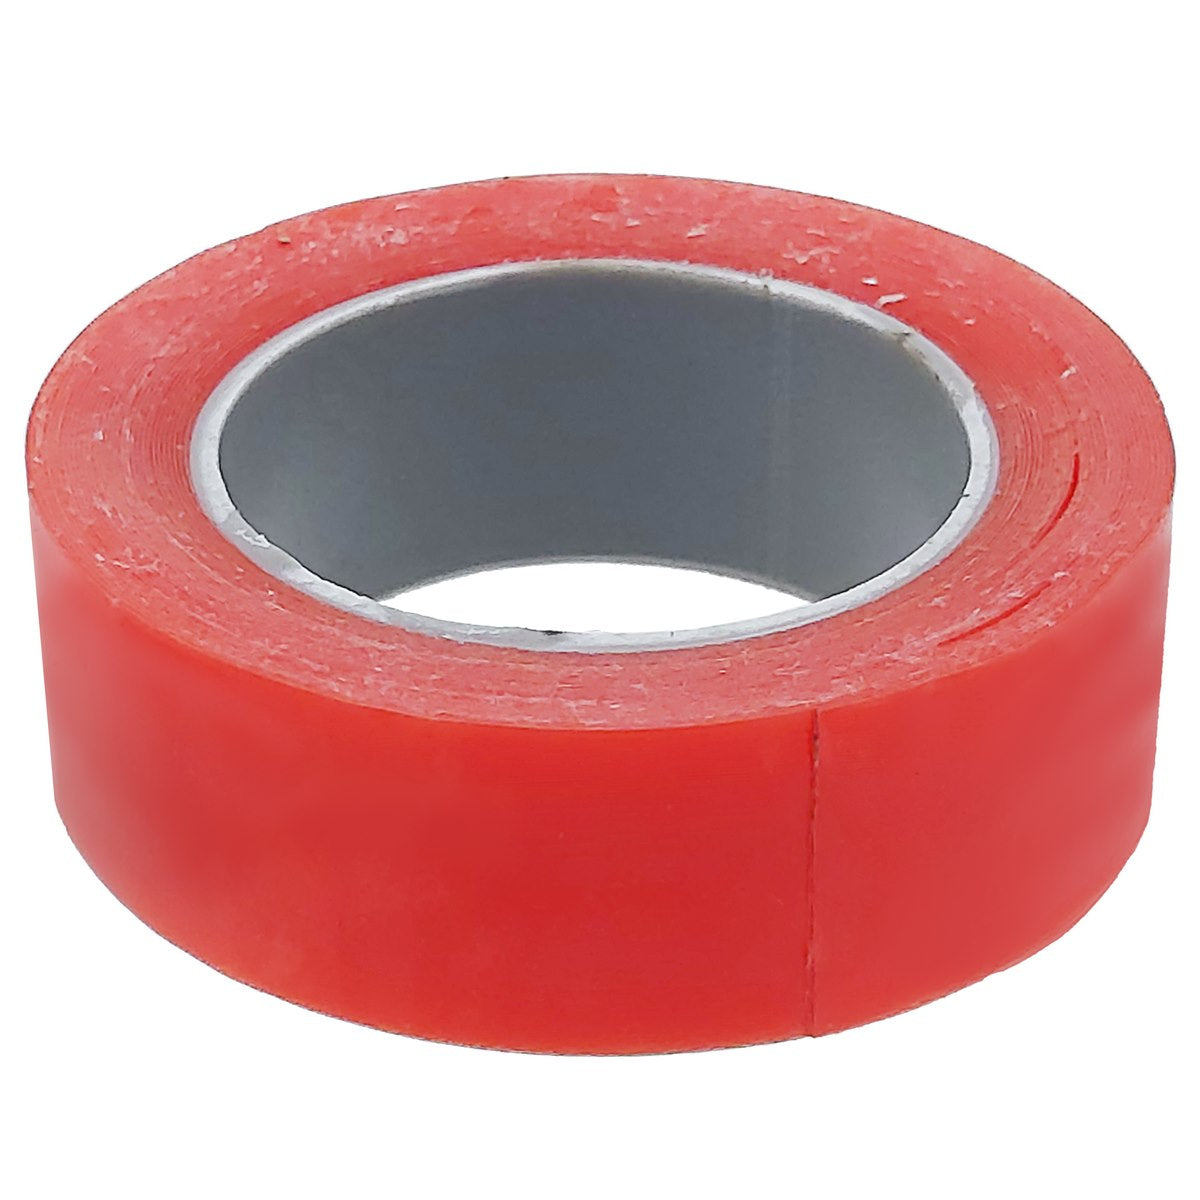 jags-mumbai Two way tape Double sided tape